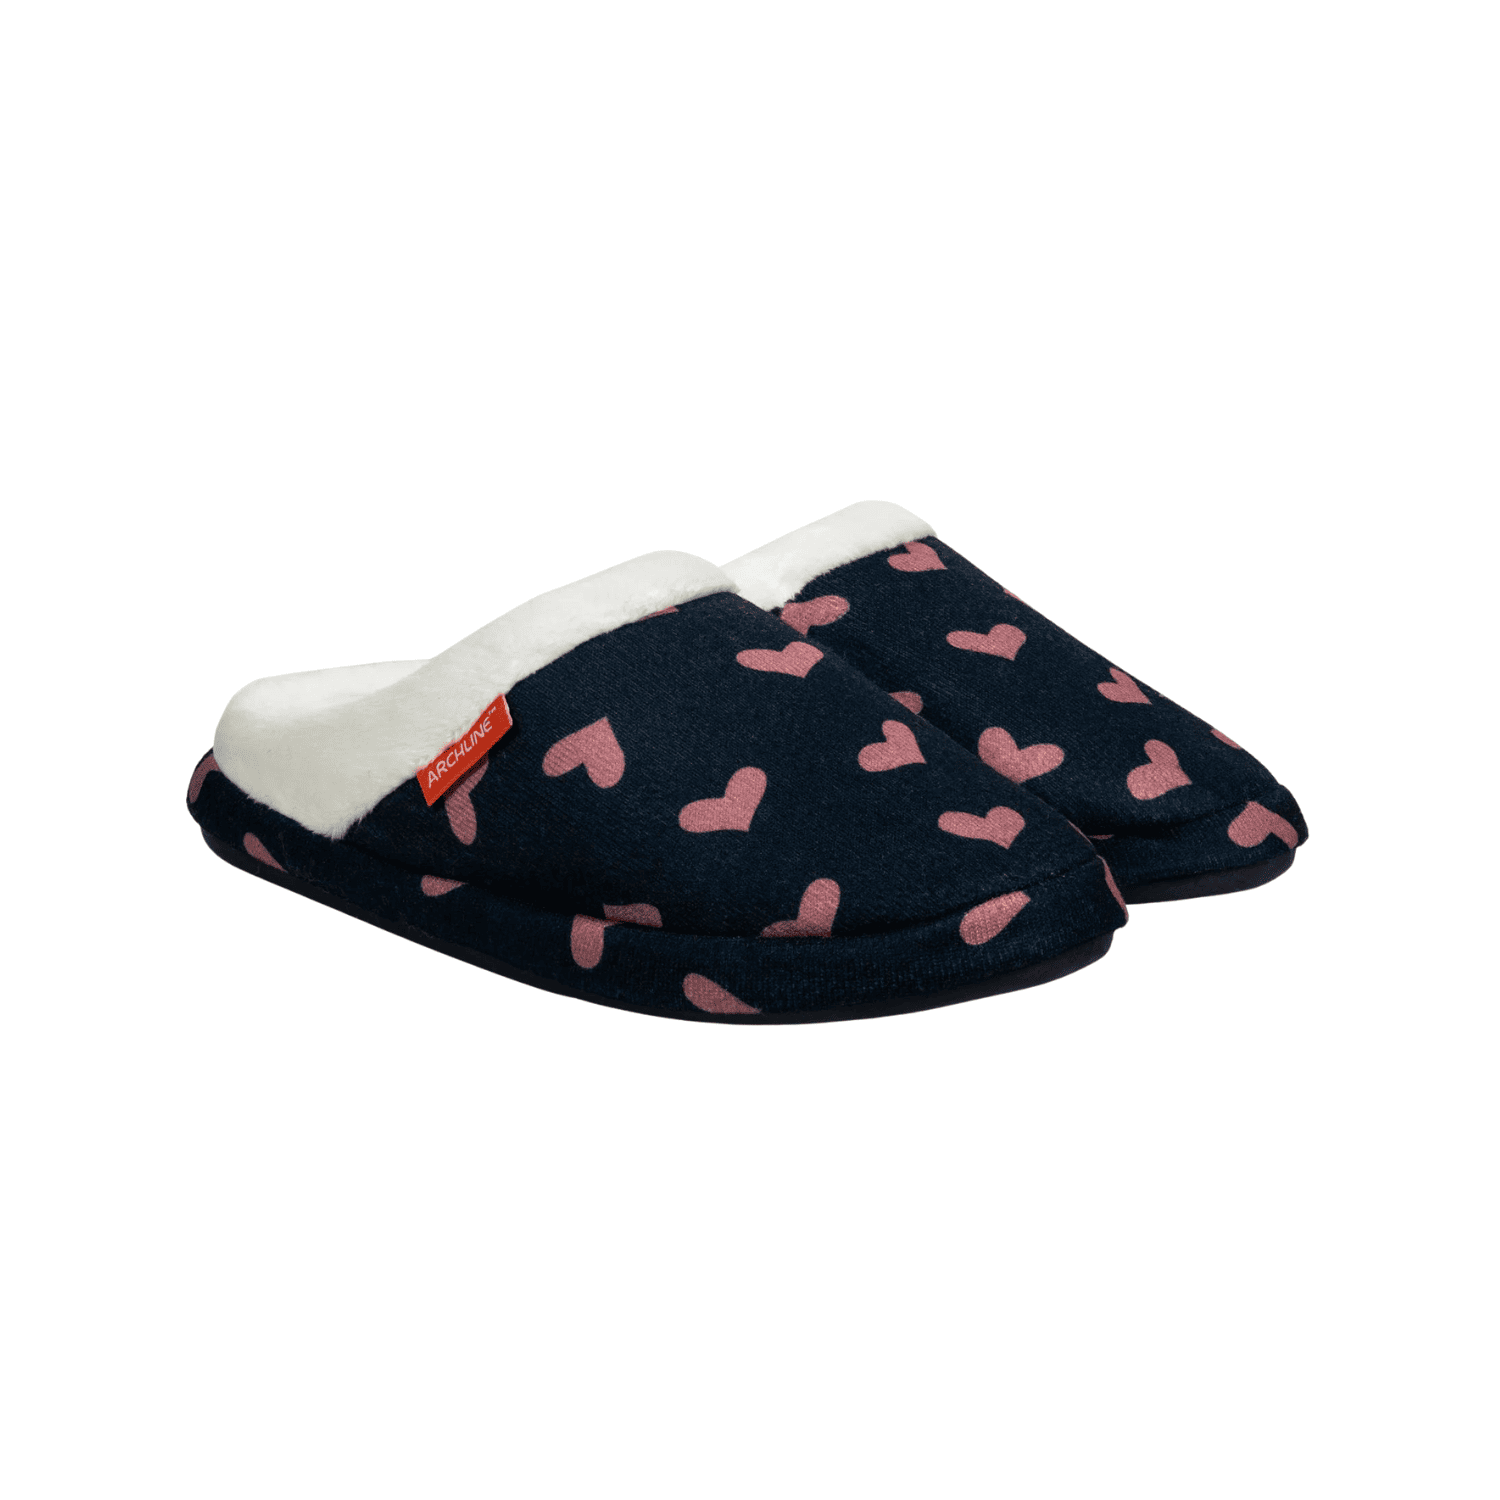 Archline Orthotic Slippers – Slip on Hearts Closed+